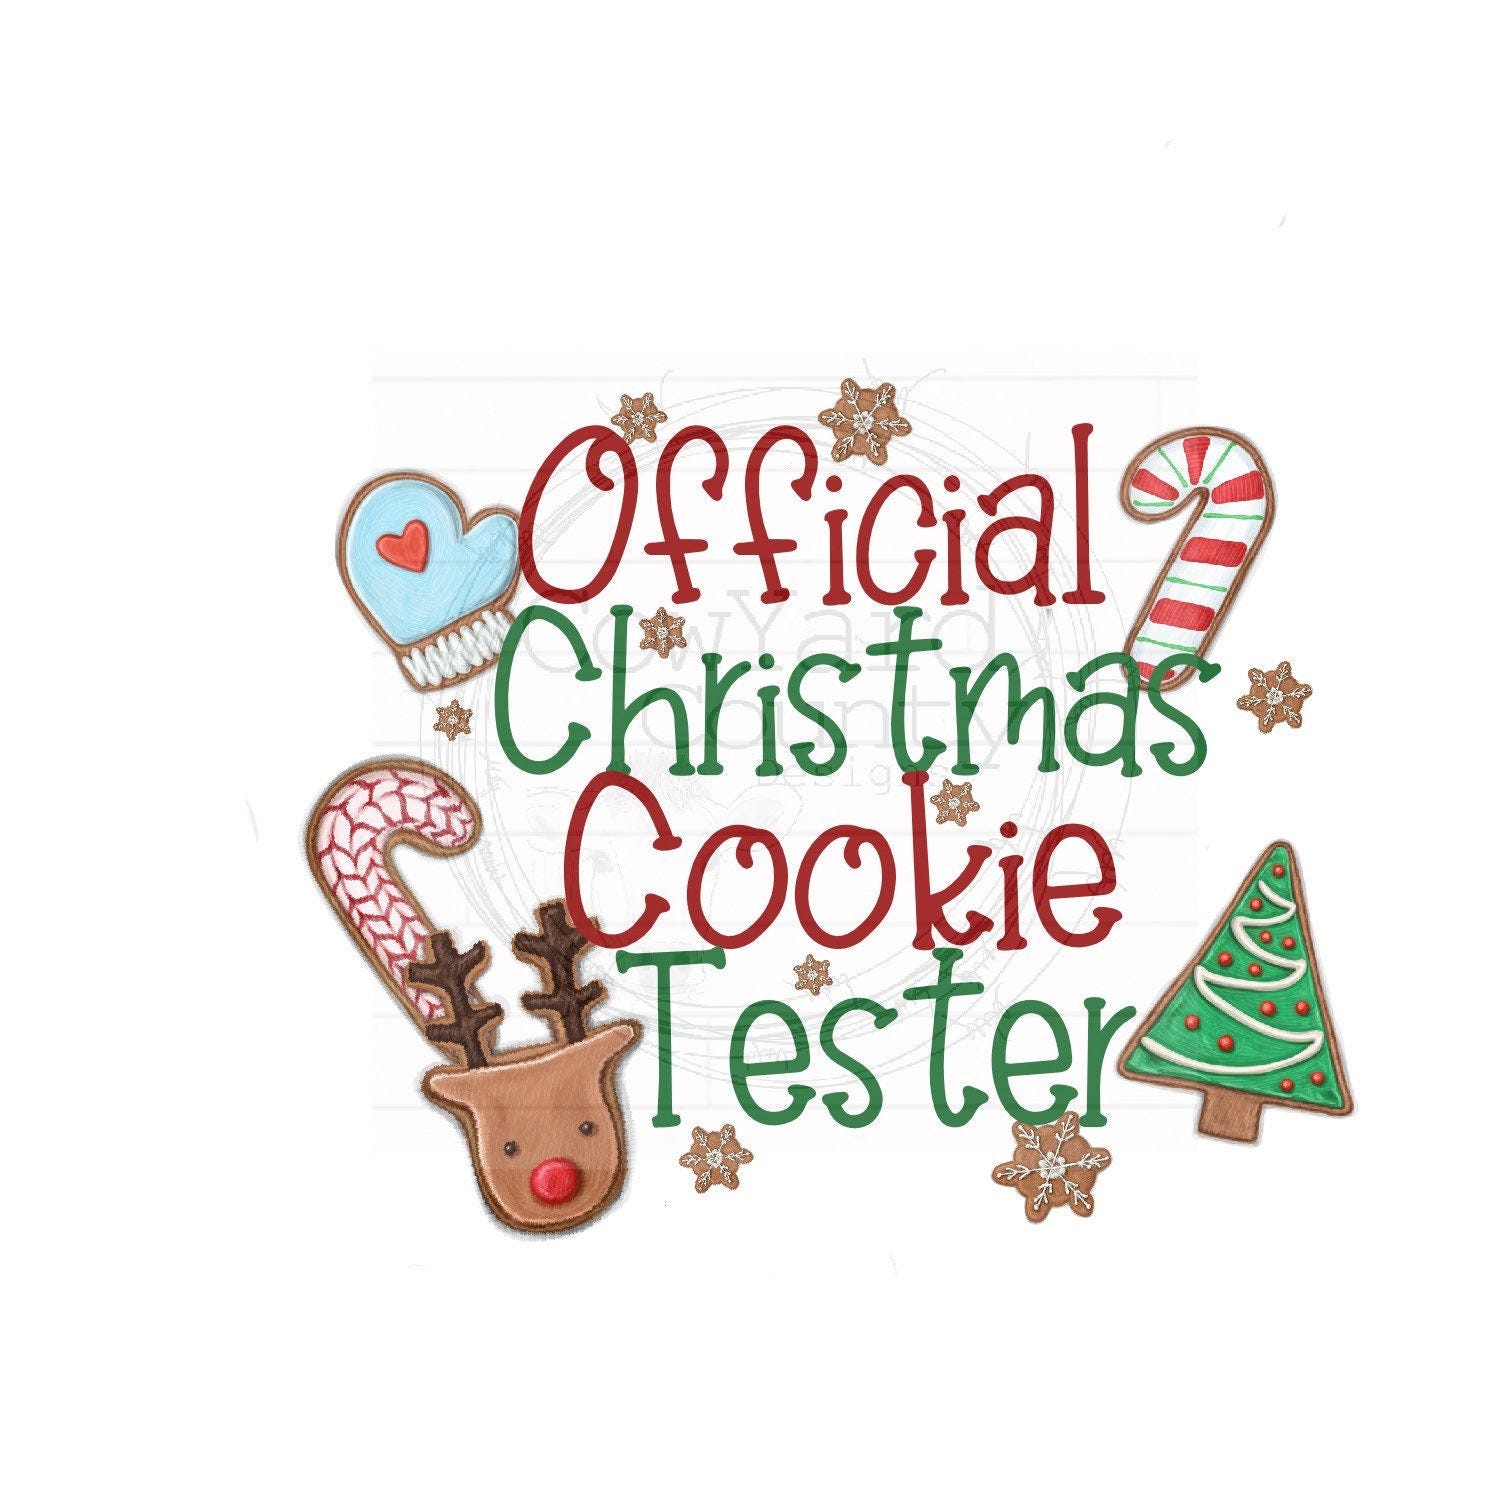 Official Christmas Cookie Tester Design, Christmas Cookie Sublimation Images, Christmas Designs, Kitchen Designs, Christmas Images, Christma